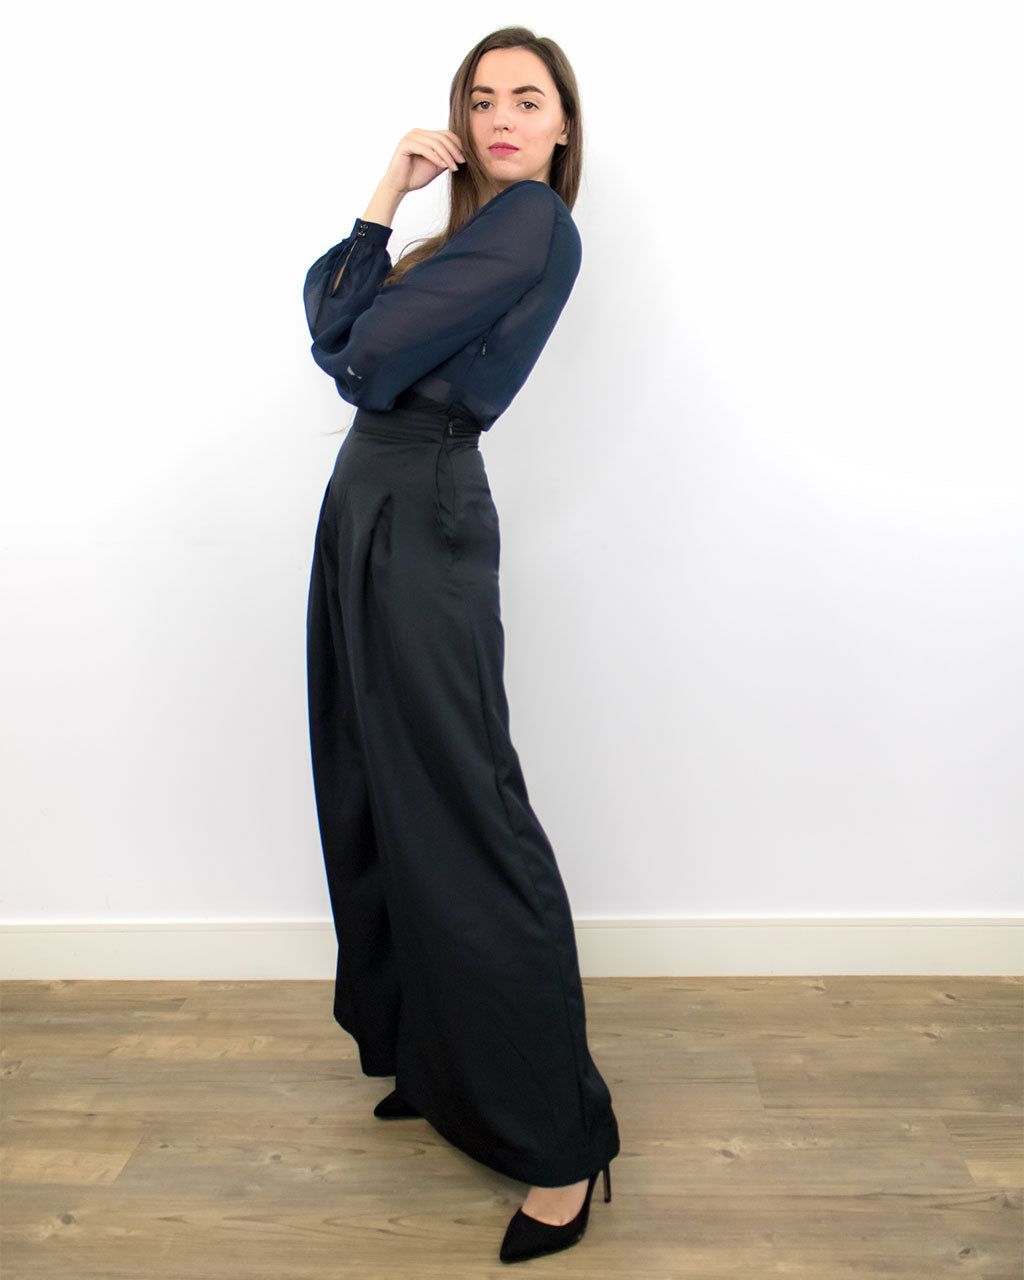 Tenes Black Wide-Leg High Waist Trousers with Pockets